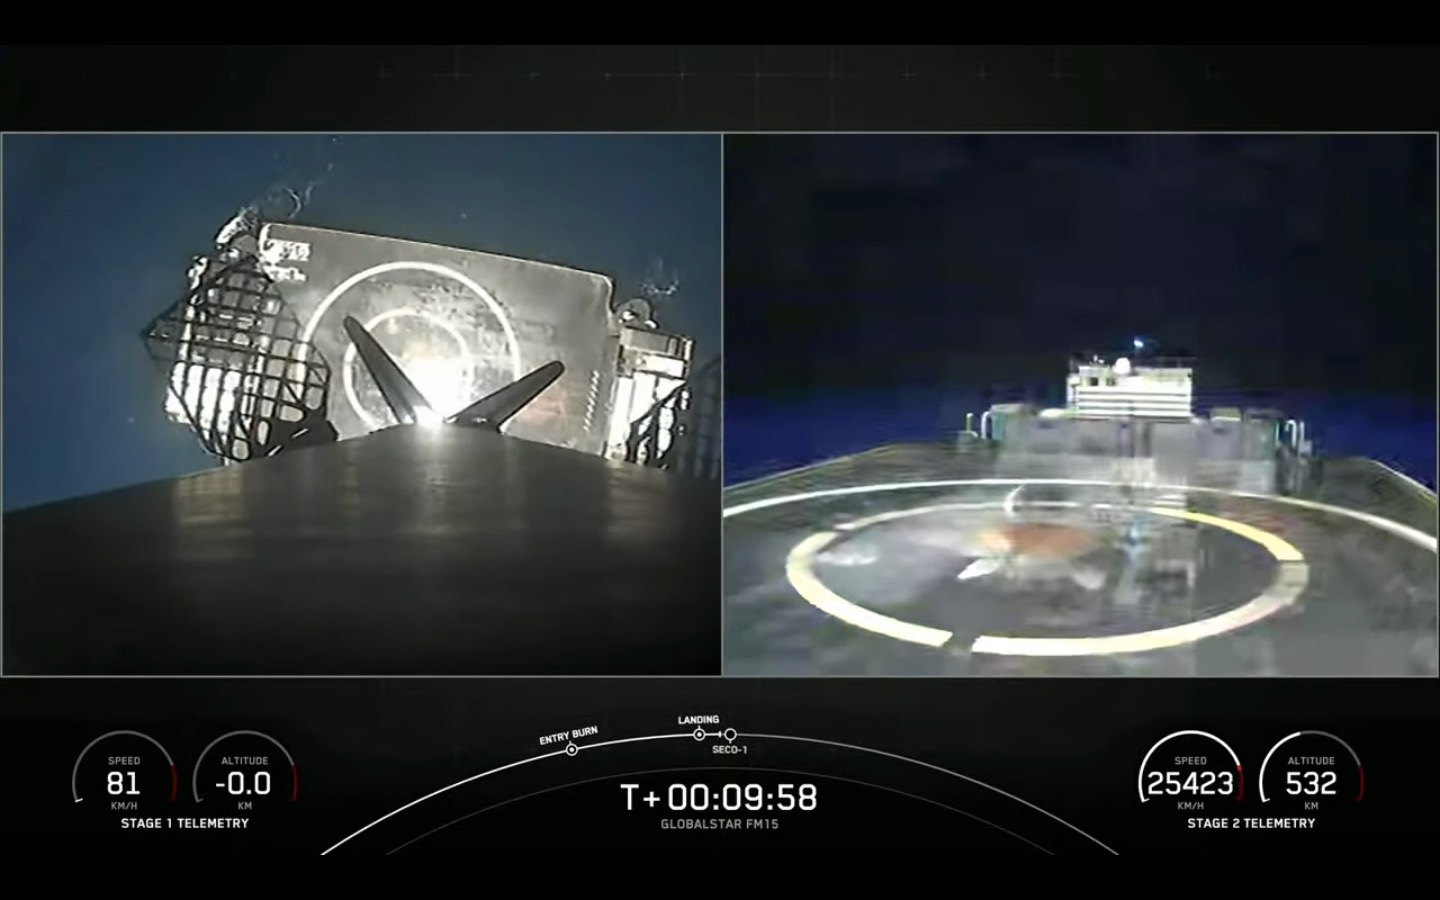 The first stage of a SpaceX Falcon 9 rocket comes down for a landing at sea on June 19, 2022, after launching a communications satellite for the company Globalstar.